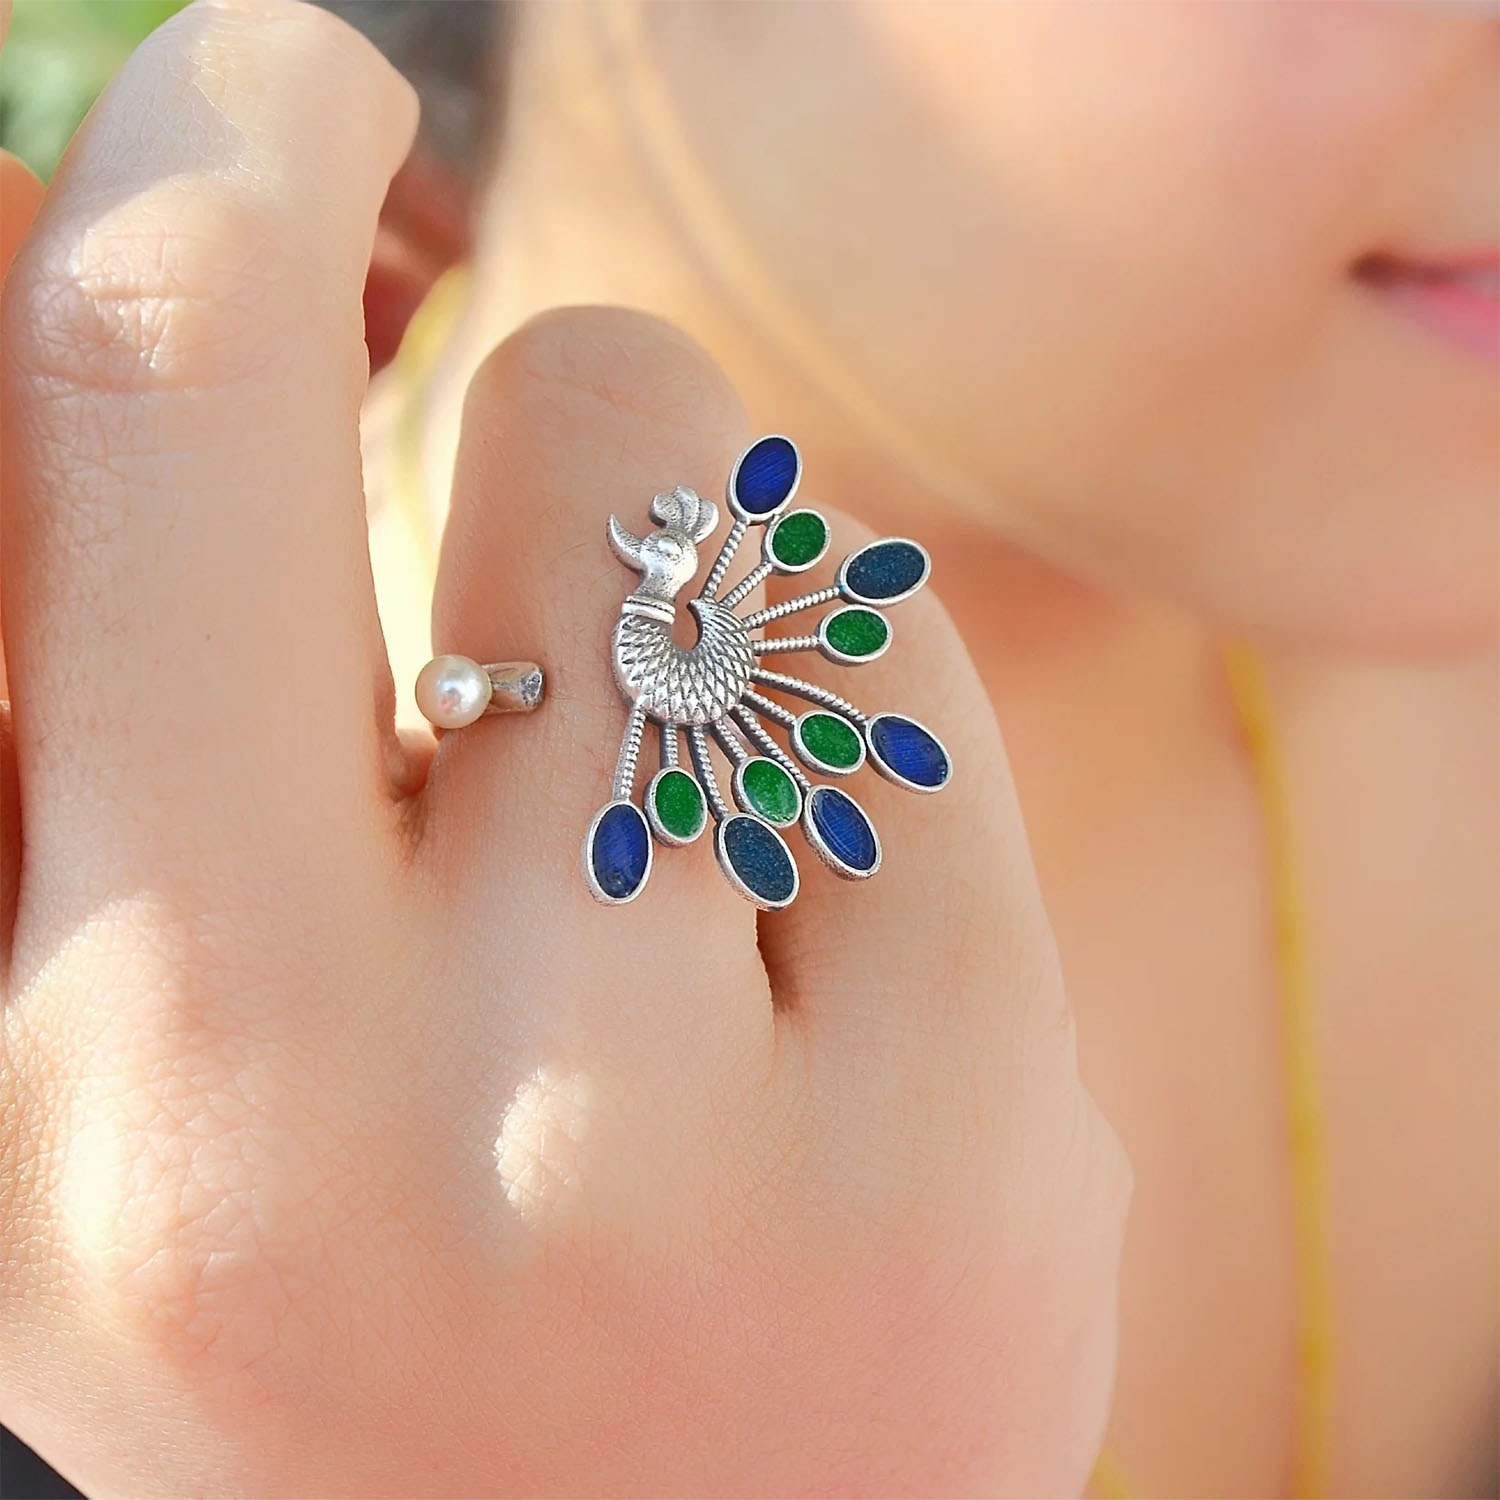 PEACOCK DESIGN 925 STERLING SILVER LAB-CREATED MULTI-COLOR OPAL RING #1299  - Walmart.com